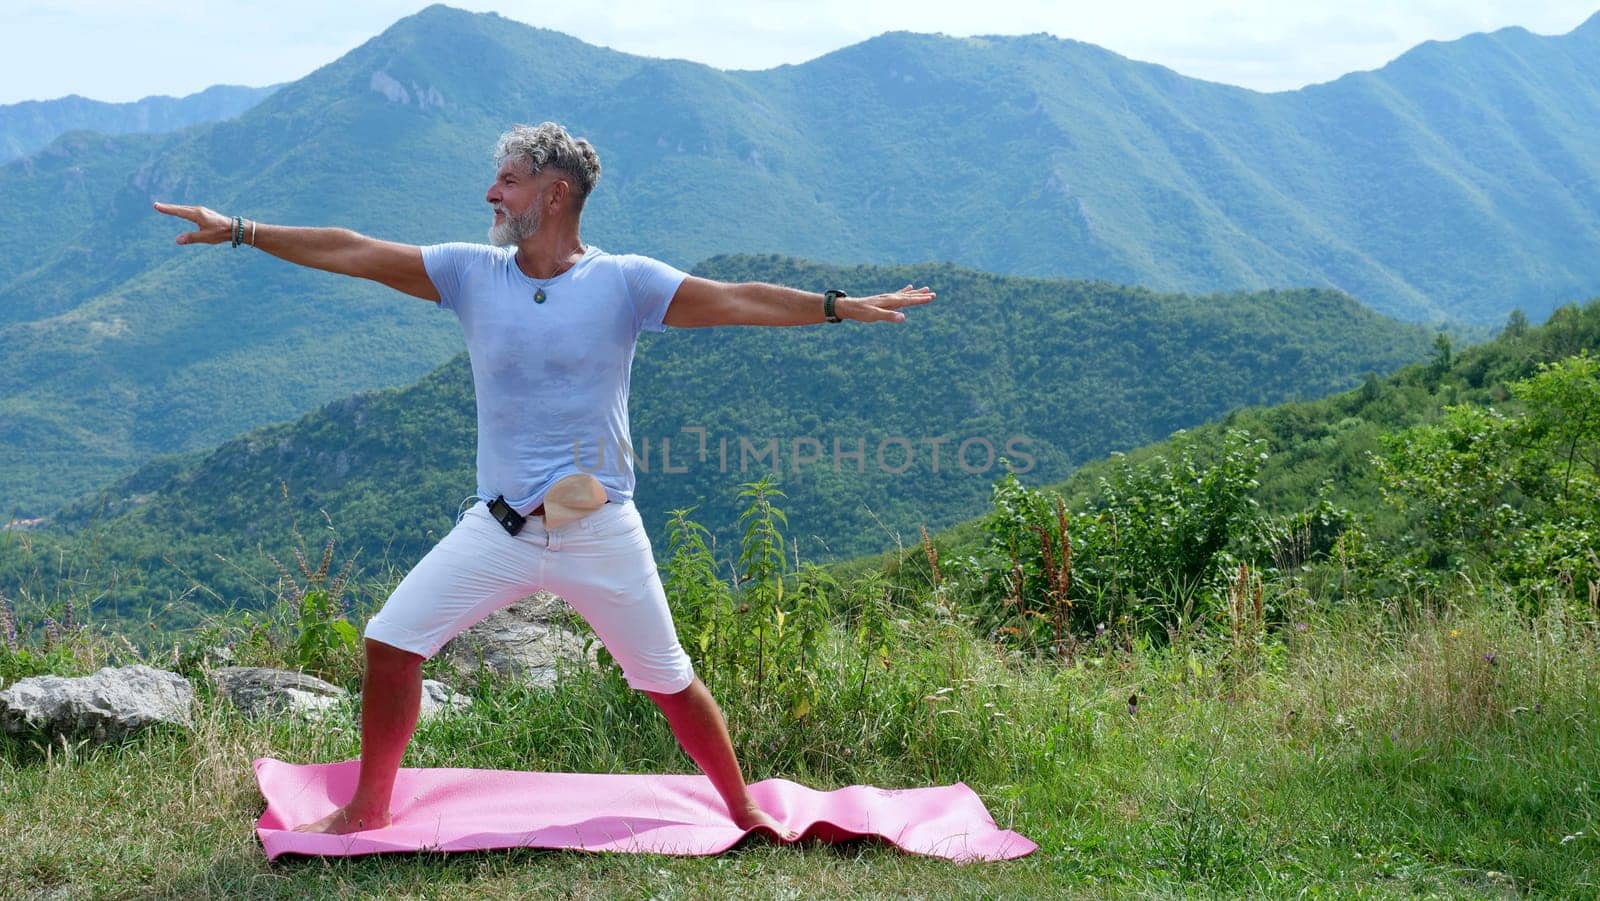 A sick old gray-haired man with diabetes and colon cancer with a colostomy practices yoga in the mountains. Stands in the pose of a warrior